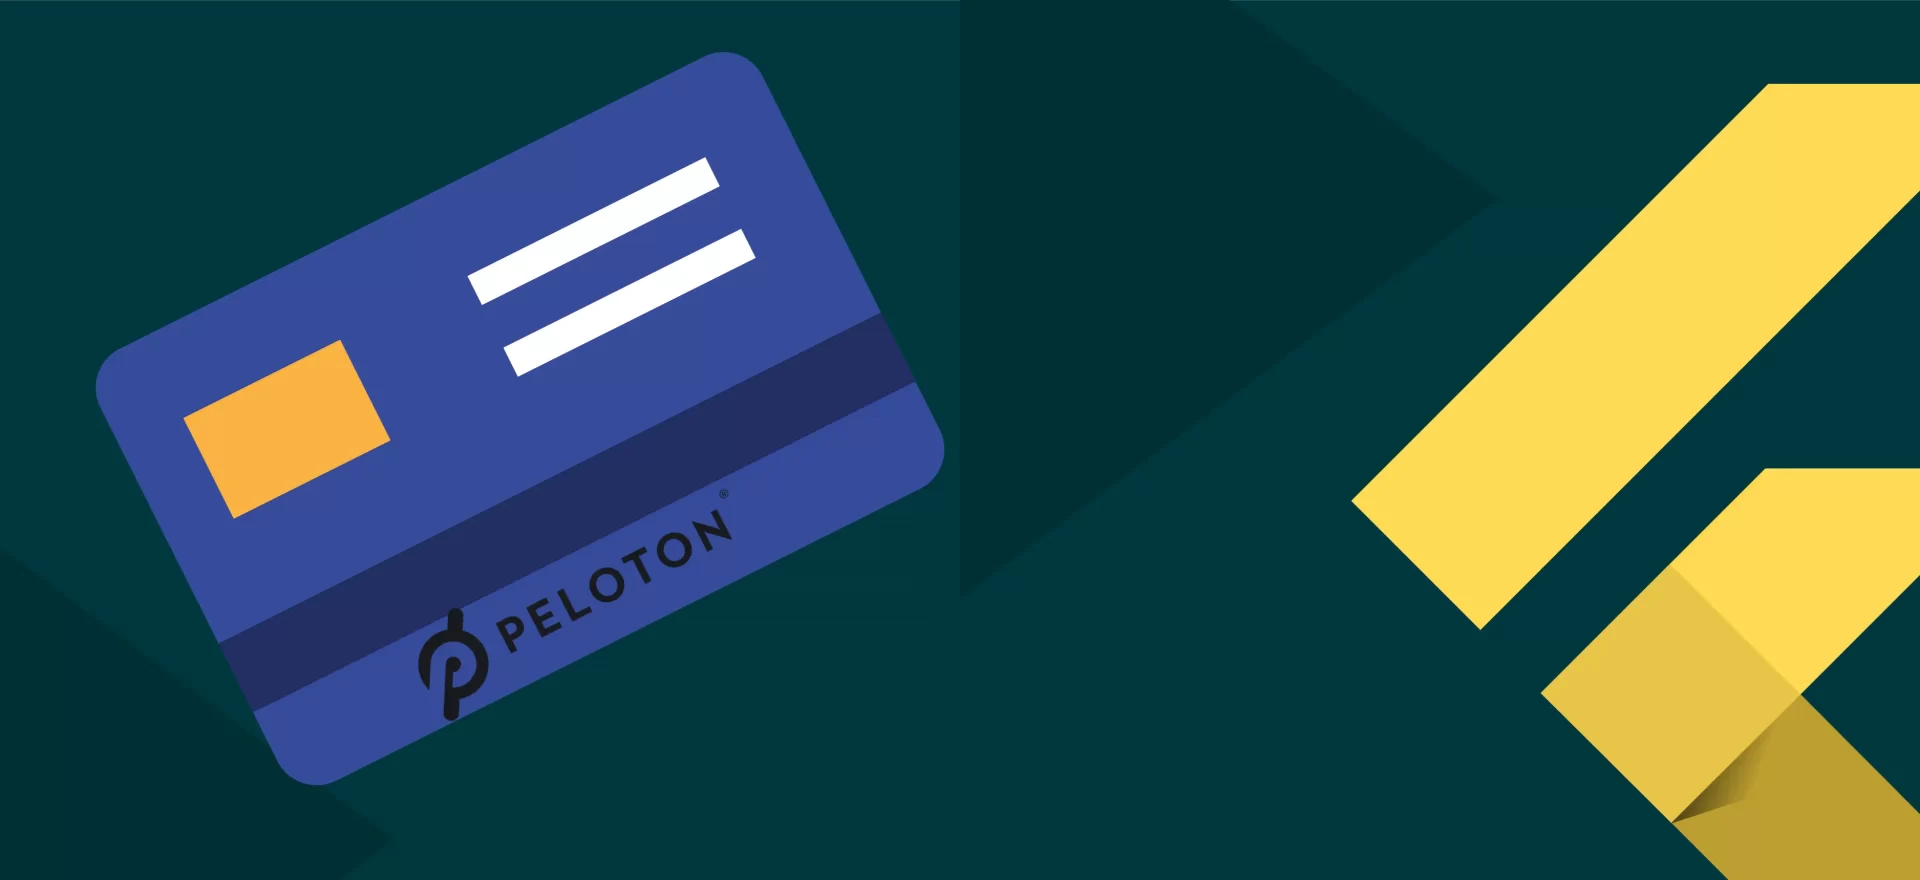 Does Peloton Offer Gift Cards